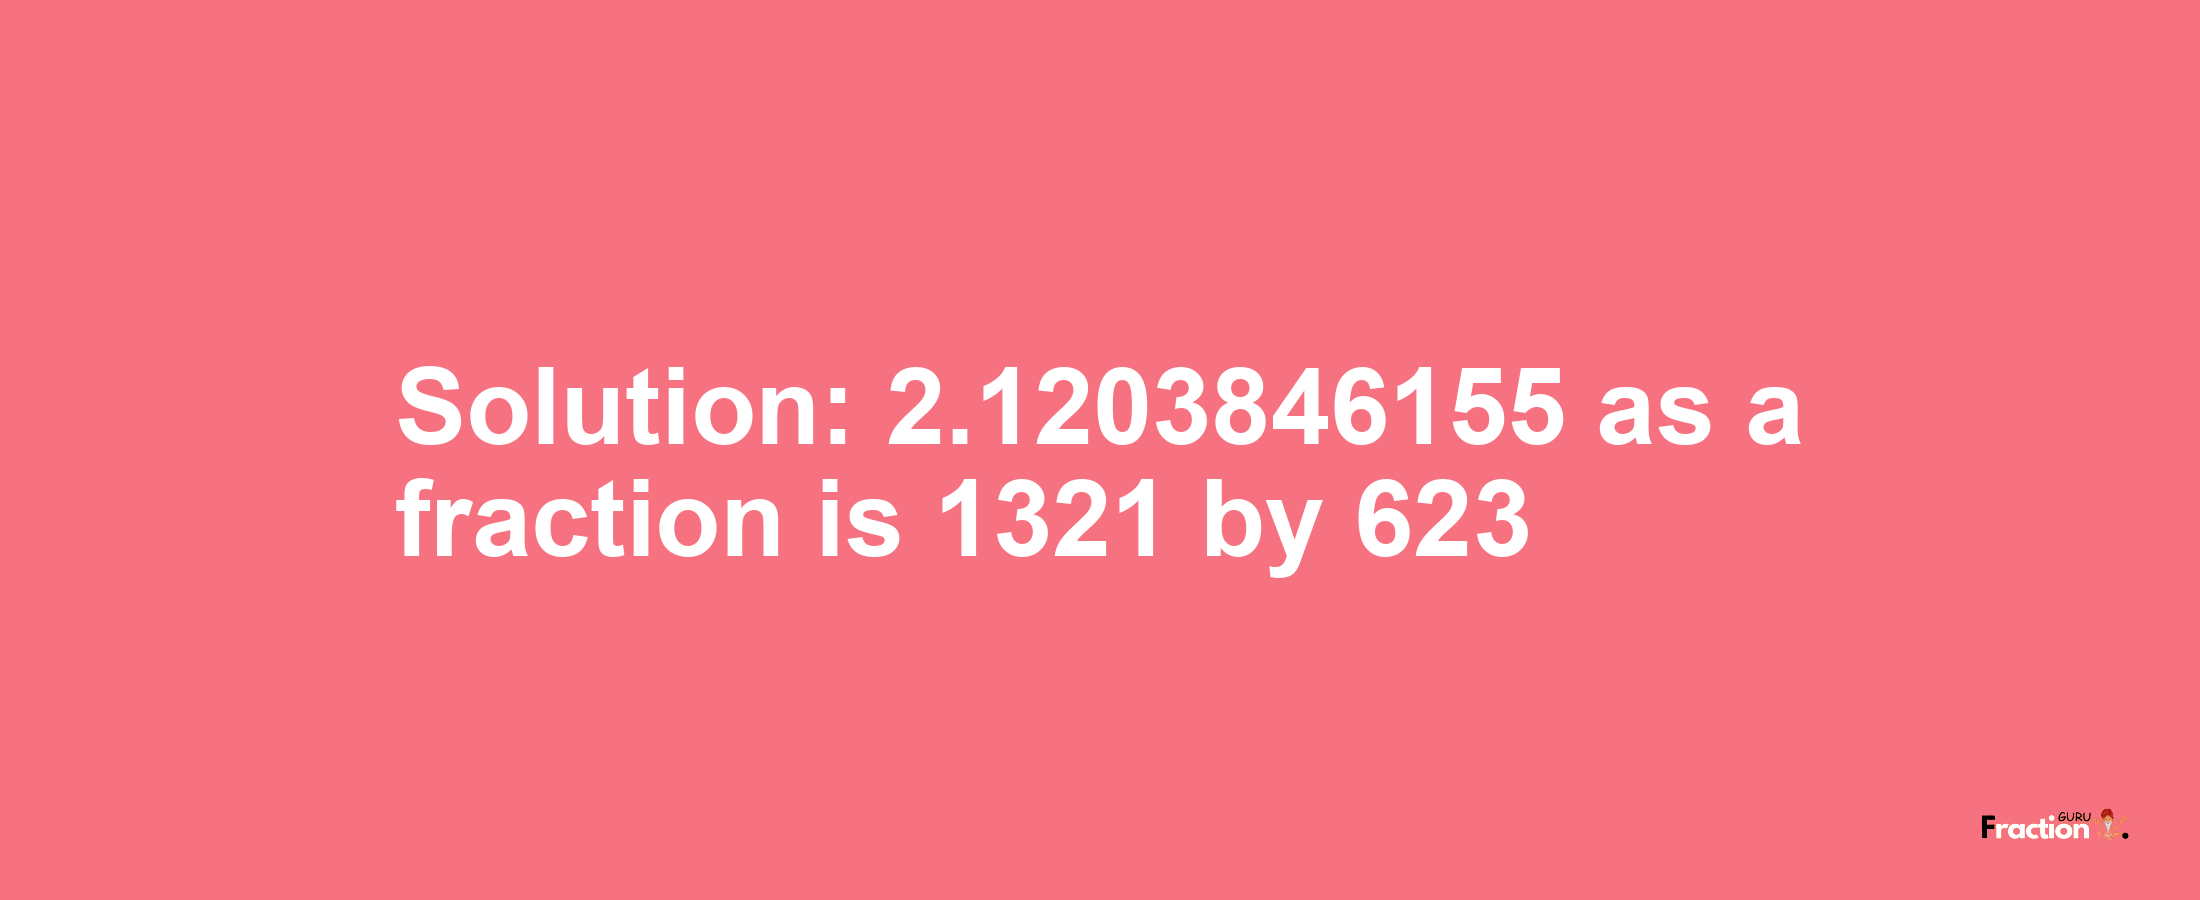 Solution:2.1203846155 as a fraction is 1321/623